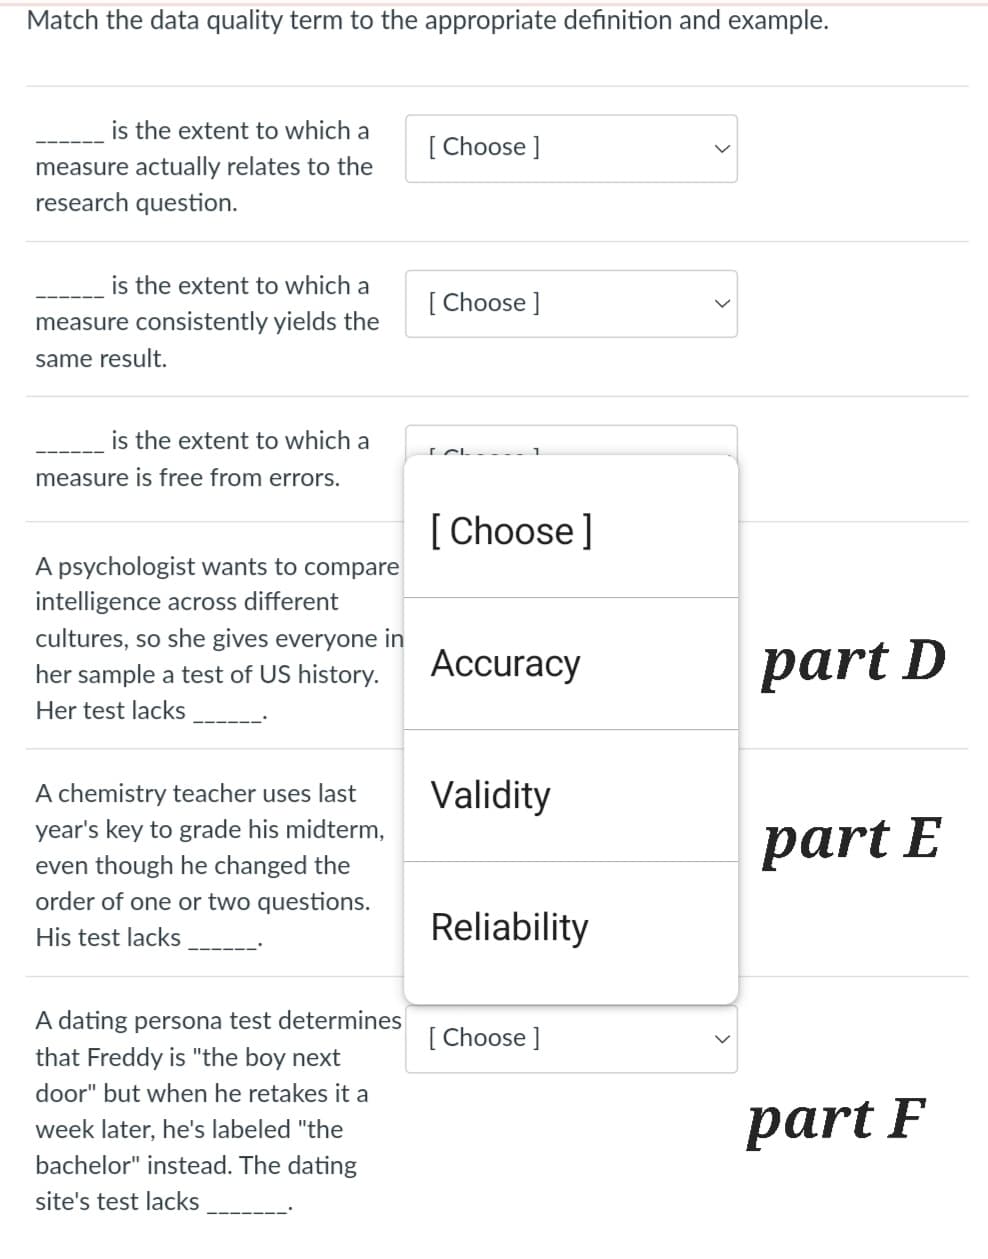 Match the data quality term to the appropriate definition and example.
is the extent to which a
measure actually relates to the
research question.
is the extent to which a
measure consistently yields the
same result.
is the extent to which a
measure is free from errors.
A psychologist wants to compare
intelligence across different
cultures, so she gives everyone in
her sample a test of US history.
Her test lacks
A chemistry teacher uses last
year's key to grade his midterm,
even though he changed the
order of one or two questions.
His test lacks
A dating persona test determines
that Freddy is "the boy next
door" but when he retakes it a
week later, he's labeled "the
bachelor" instead. The dating
site's test lacks
[Choose ]
[Choose ]
[Choose ]
Accuracy
Validity
Reliability
[Choose ]
part D
part E
part F